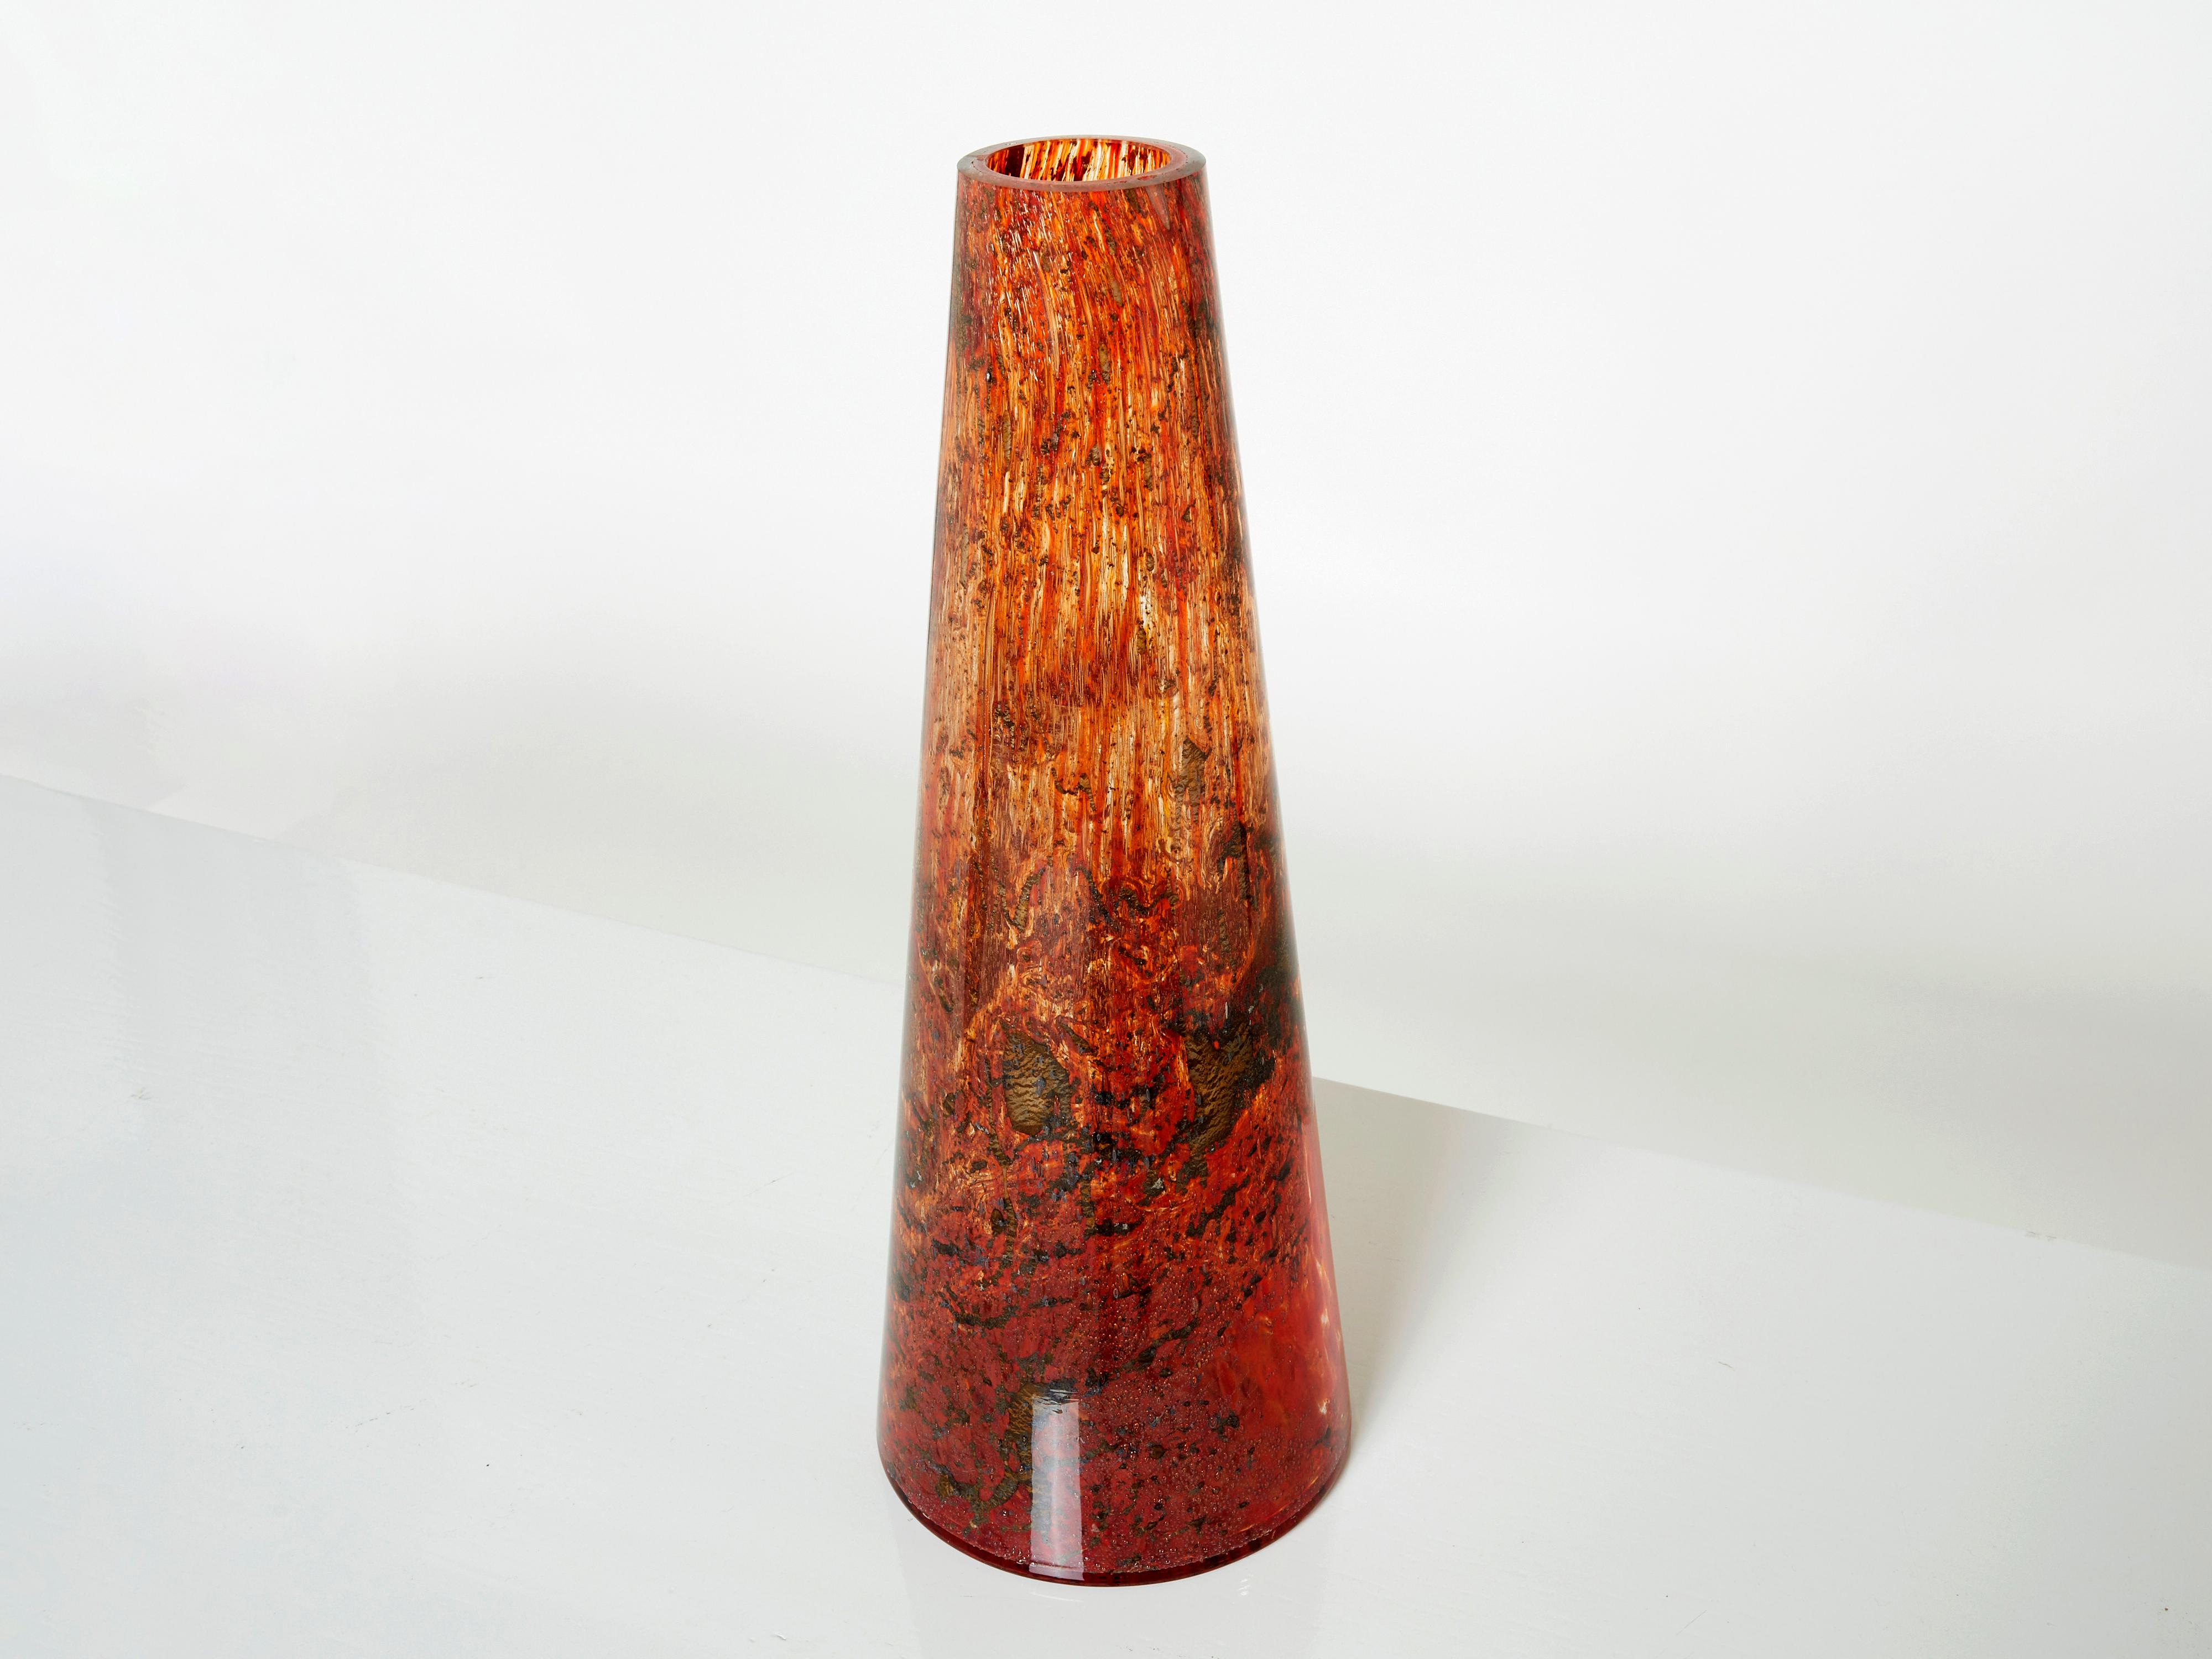 Beautiful tall Murano glass vase made in the 1970s. This vase has eye-catching colors, with brown inclusions submerged into orange and red glass. It is quite big and heavy, and has a wonderful presence. Found in a very good vintage condition.
  